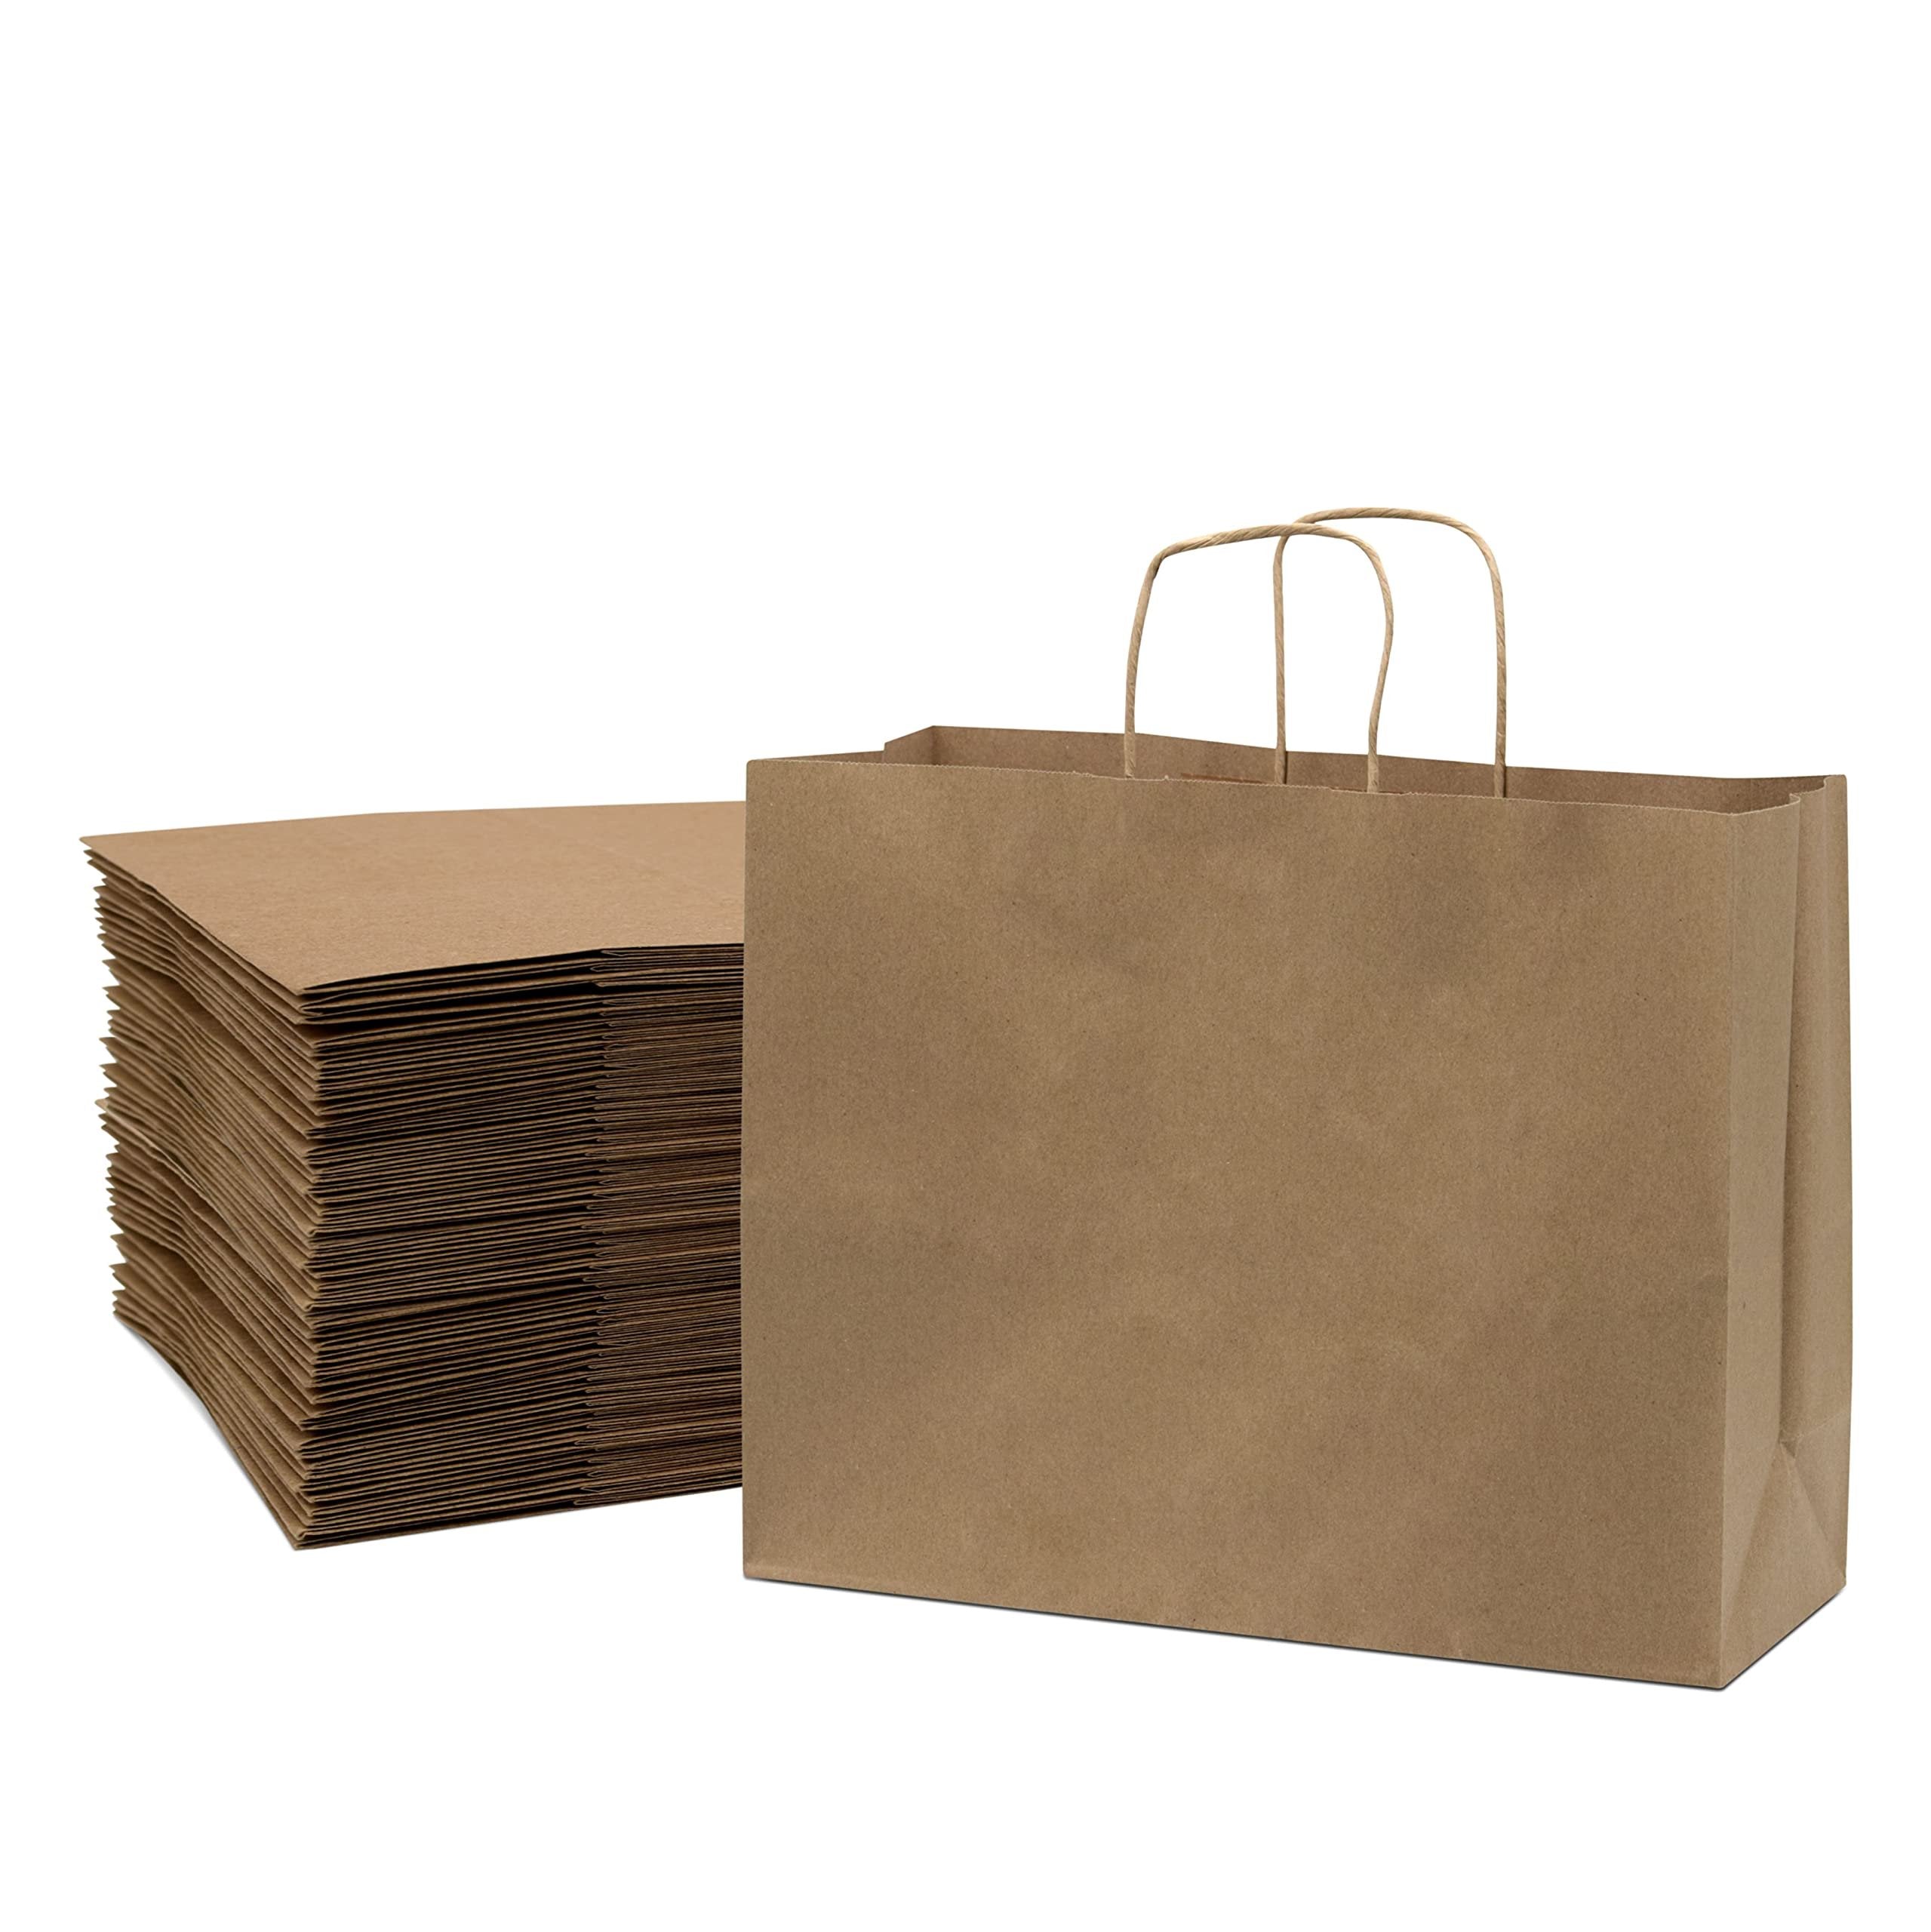 Brown Paper Bags - 16x6x12 Inch 100 Pack Paper Bags with Handles, Large Gift Bag, Shopping Bags for Small Business, Boutique Retail & Merchandise Use, Birthday Party Goodie & Favor Bags, in Bulk